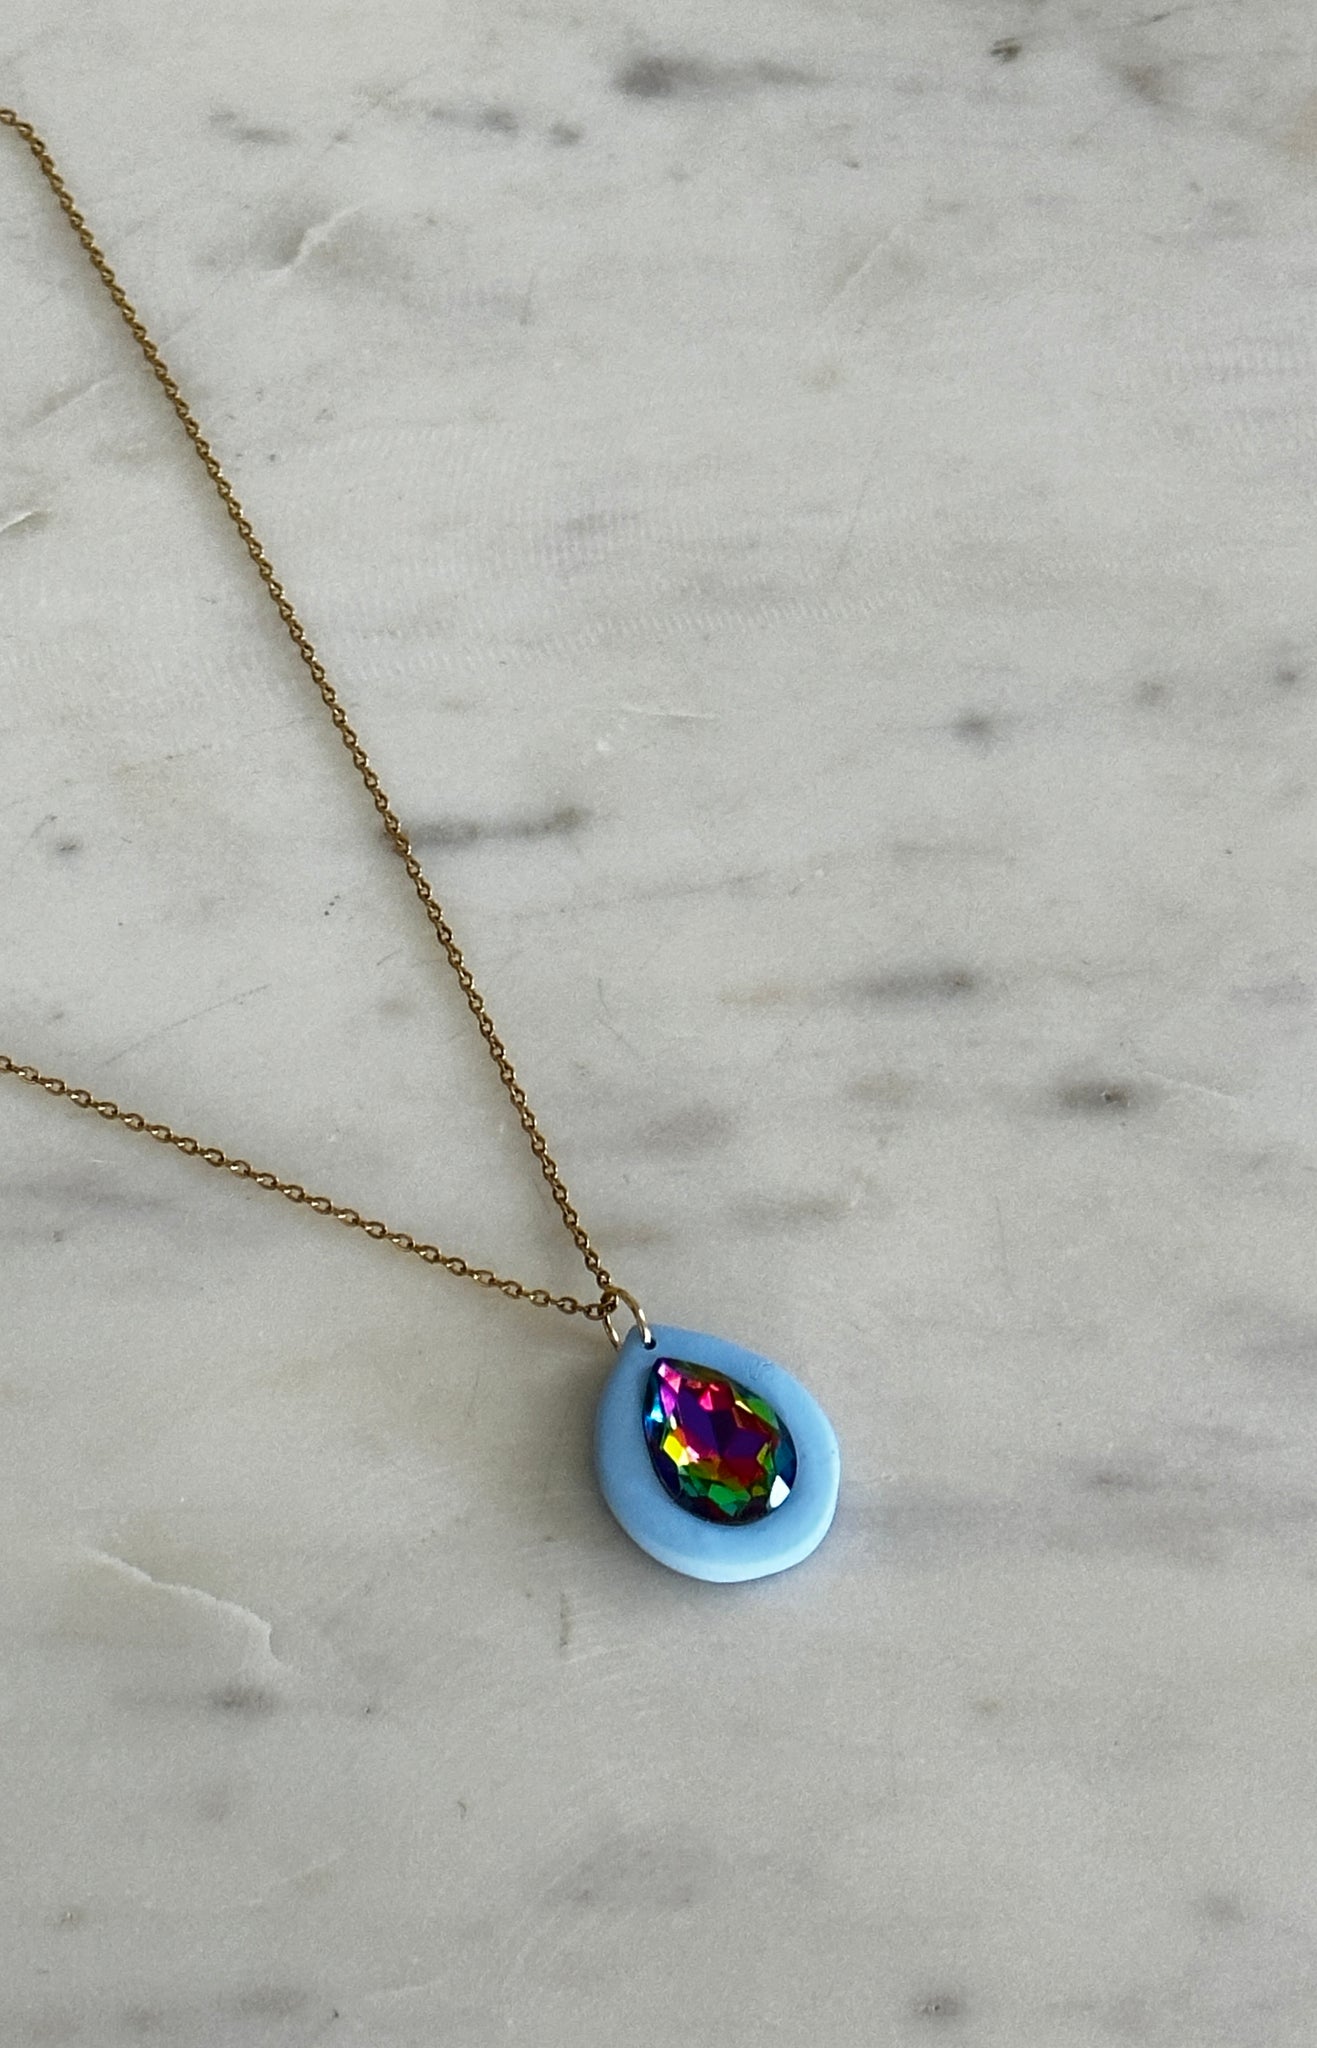 Bright necklace